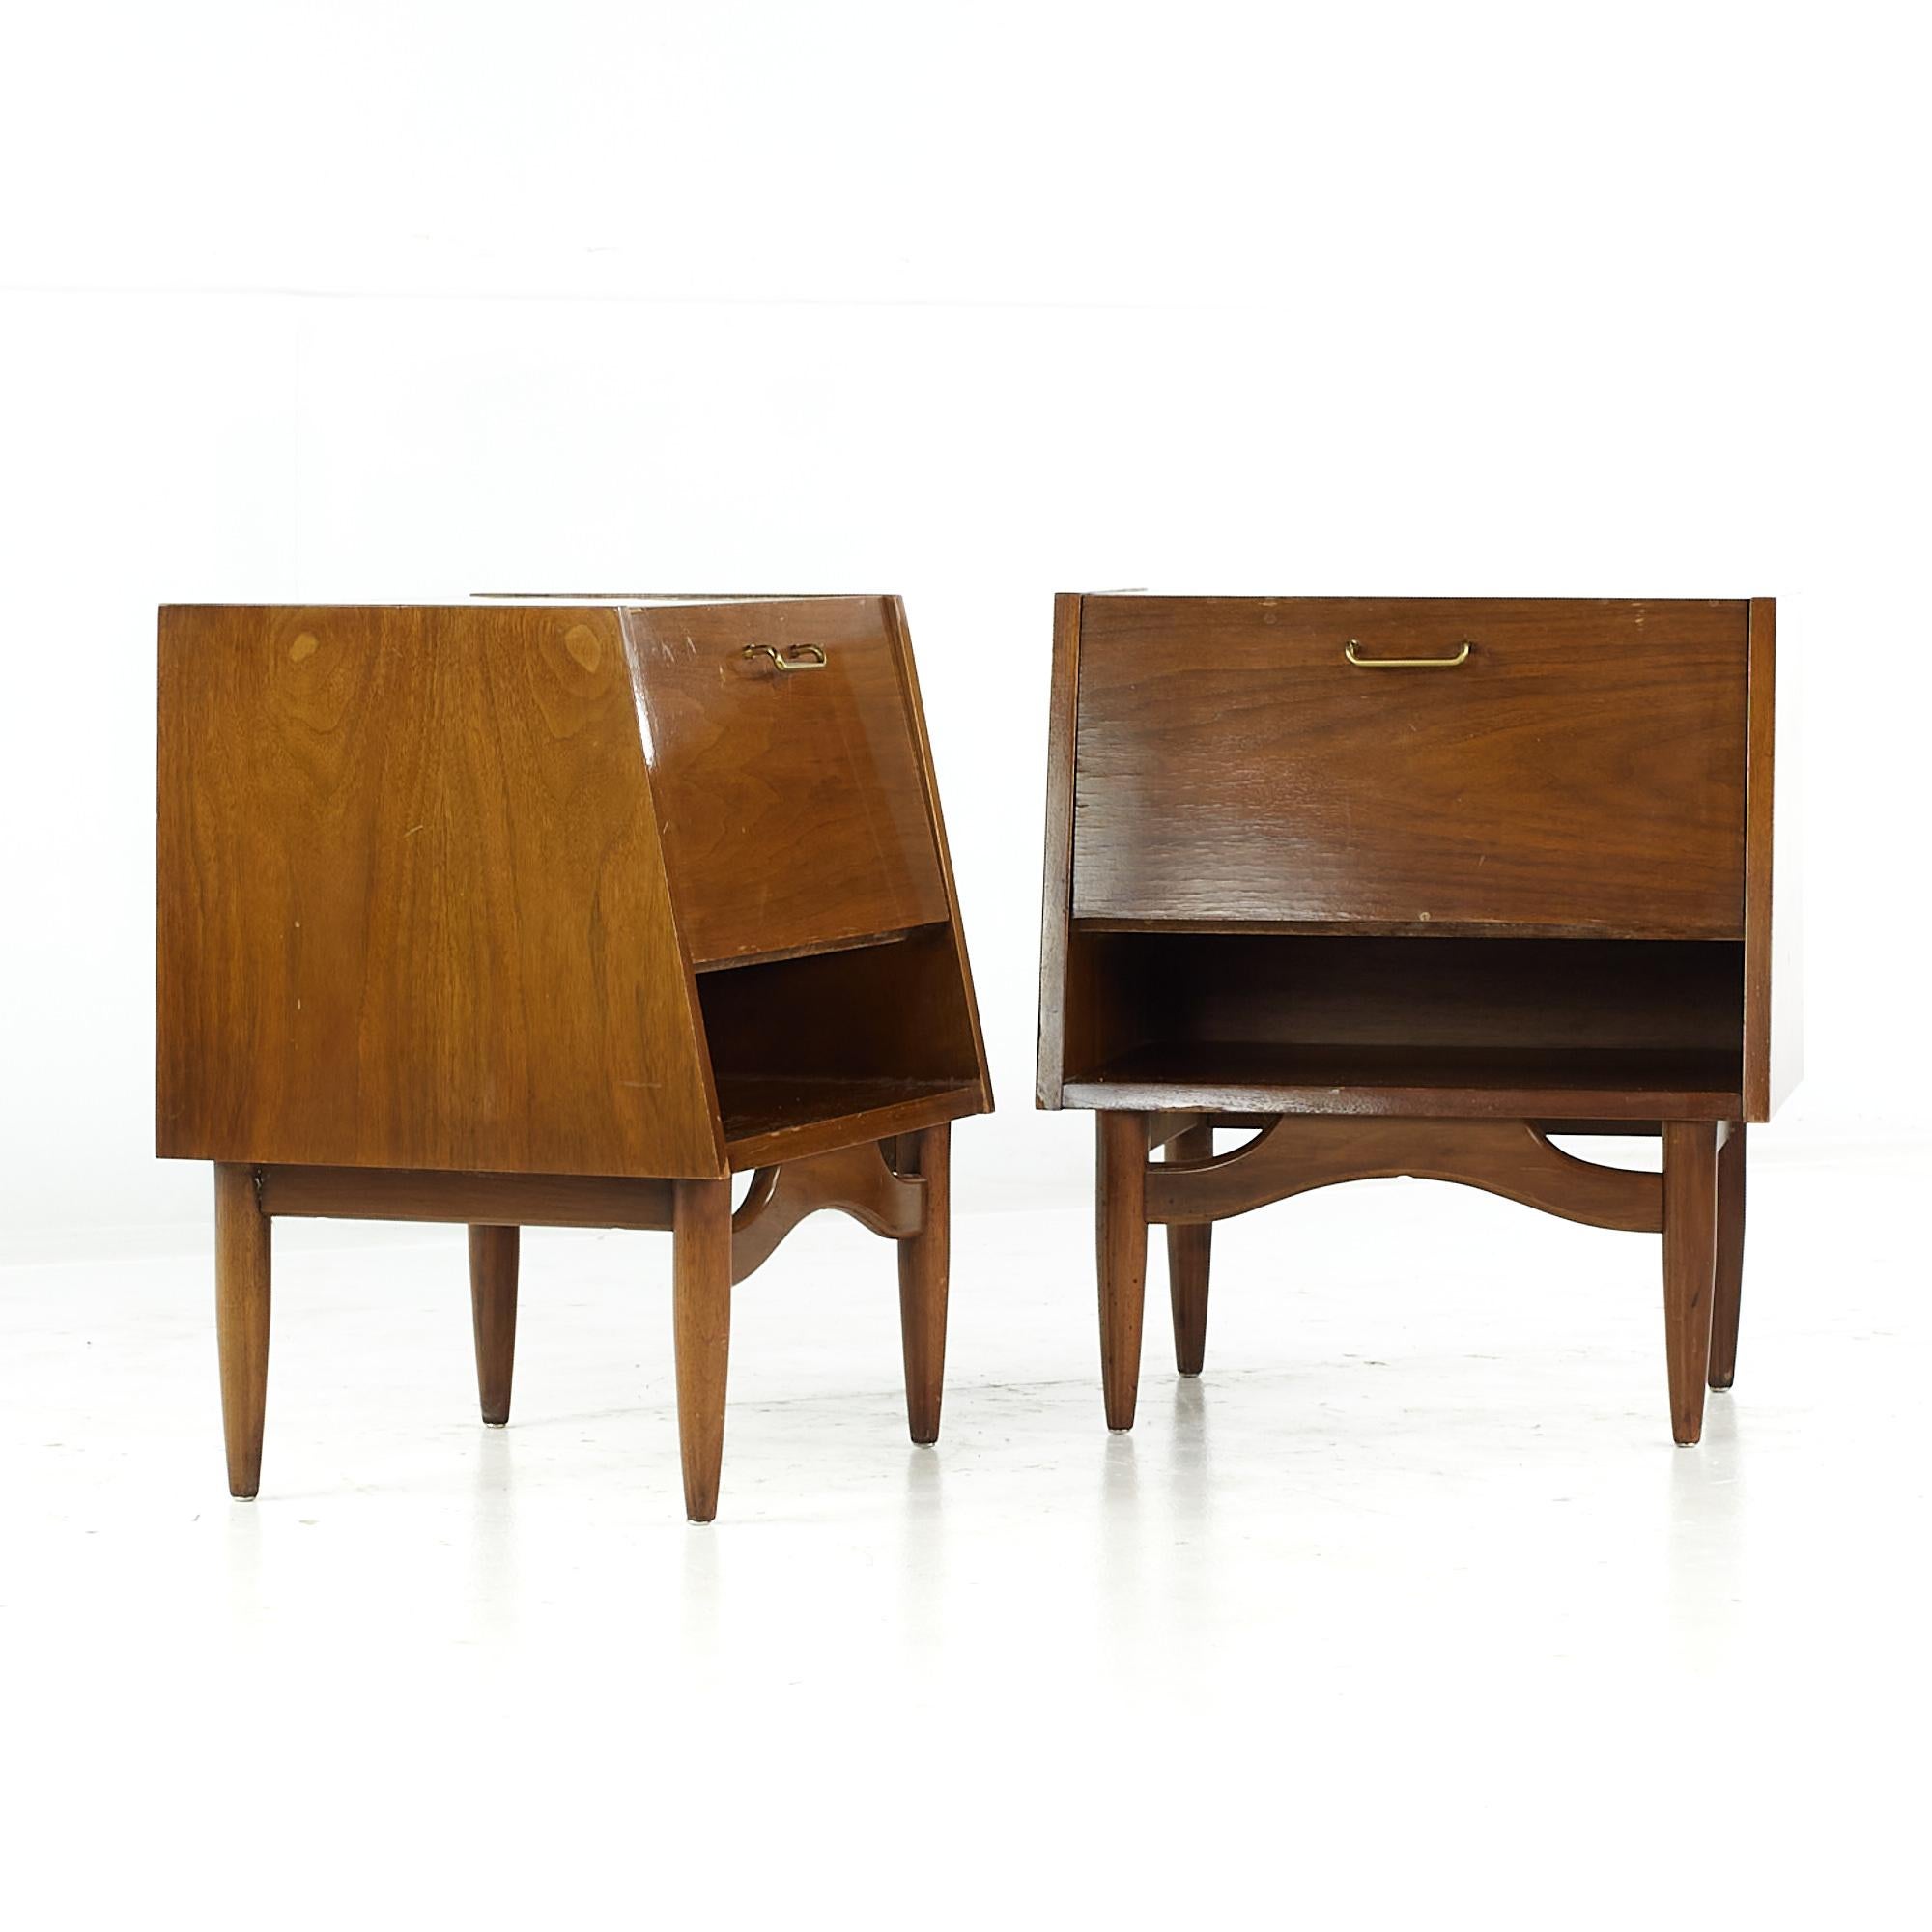 Merton Gershun for American of Martinsville mid-century walnut nightstands - pair.

Each nightstand measures: 22 wide x 17 deep x 25.25 inches high.

All pieces of furniture can be had in what we call restored vintage condition. That means the